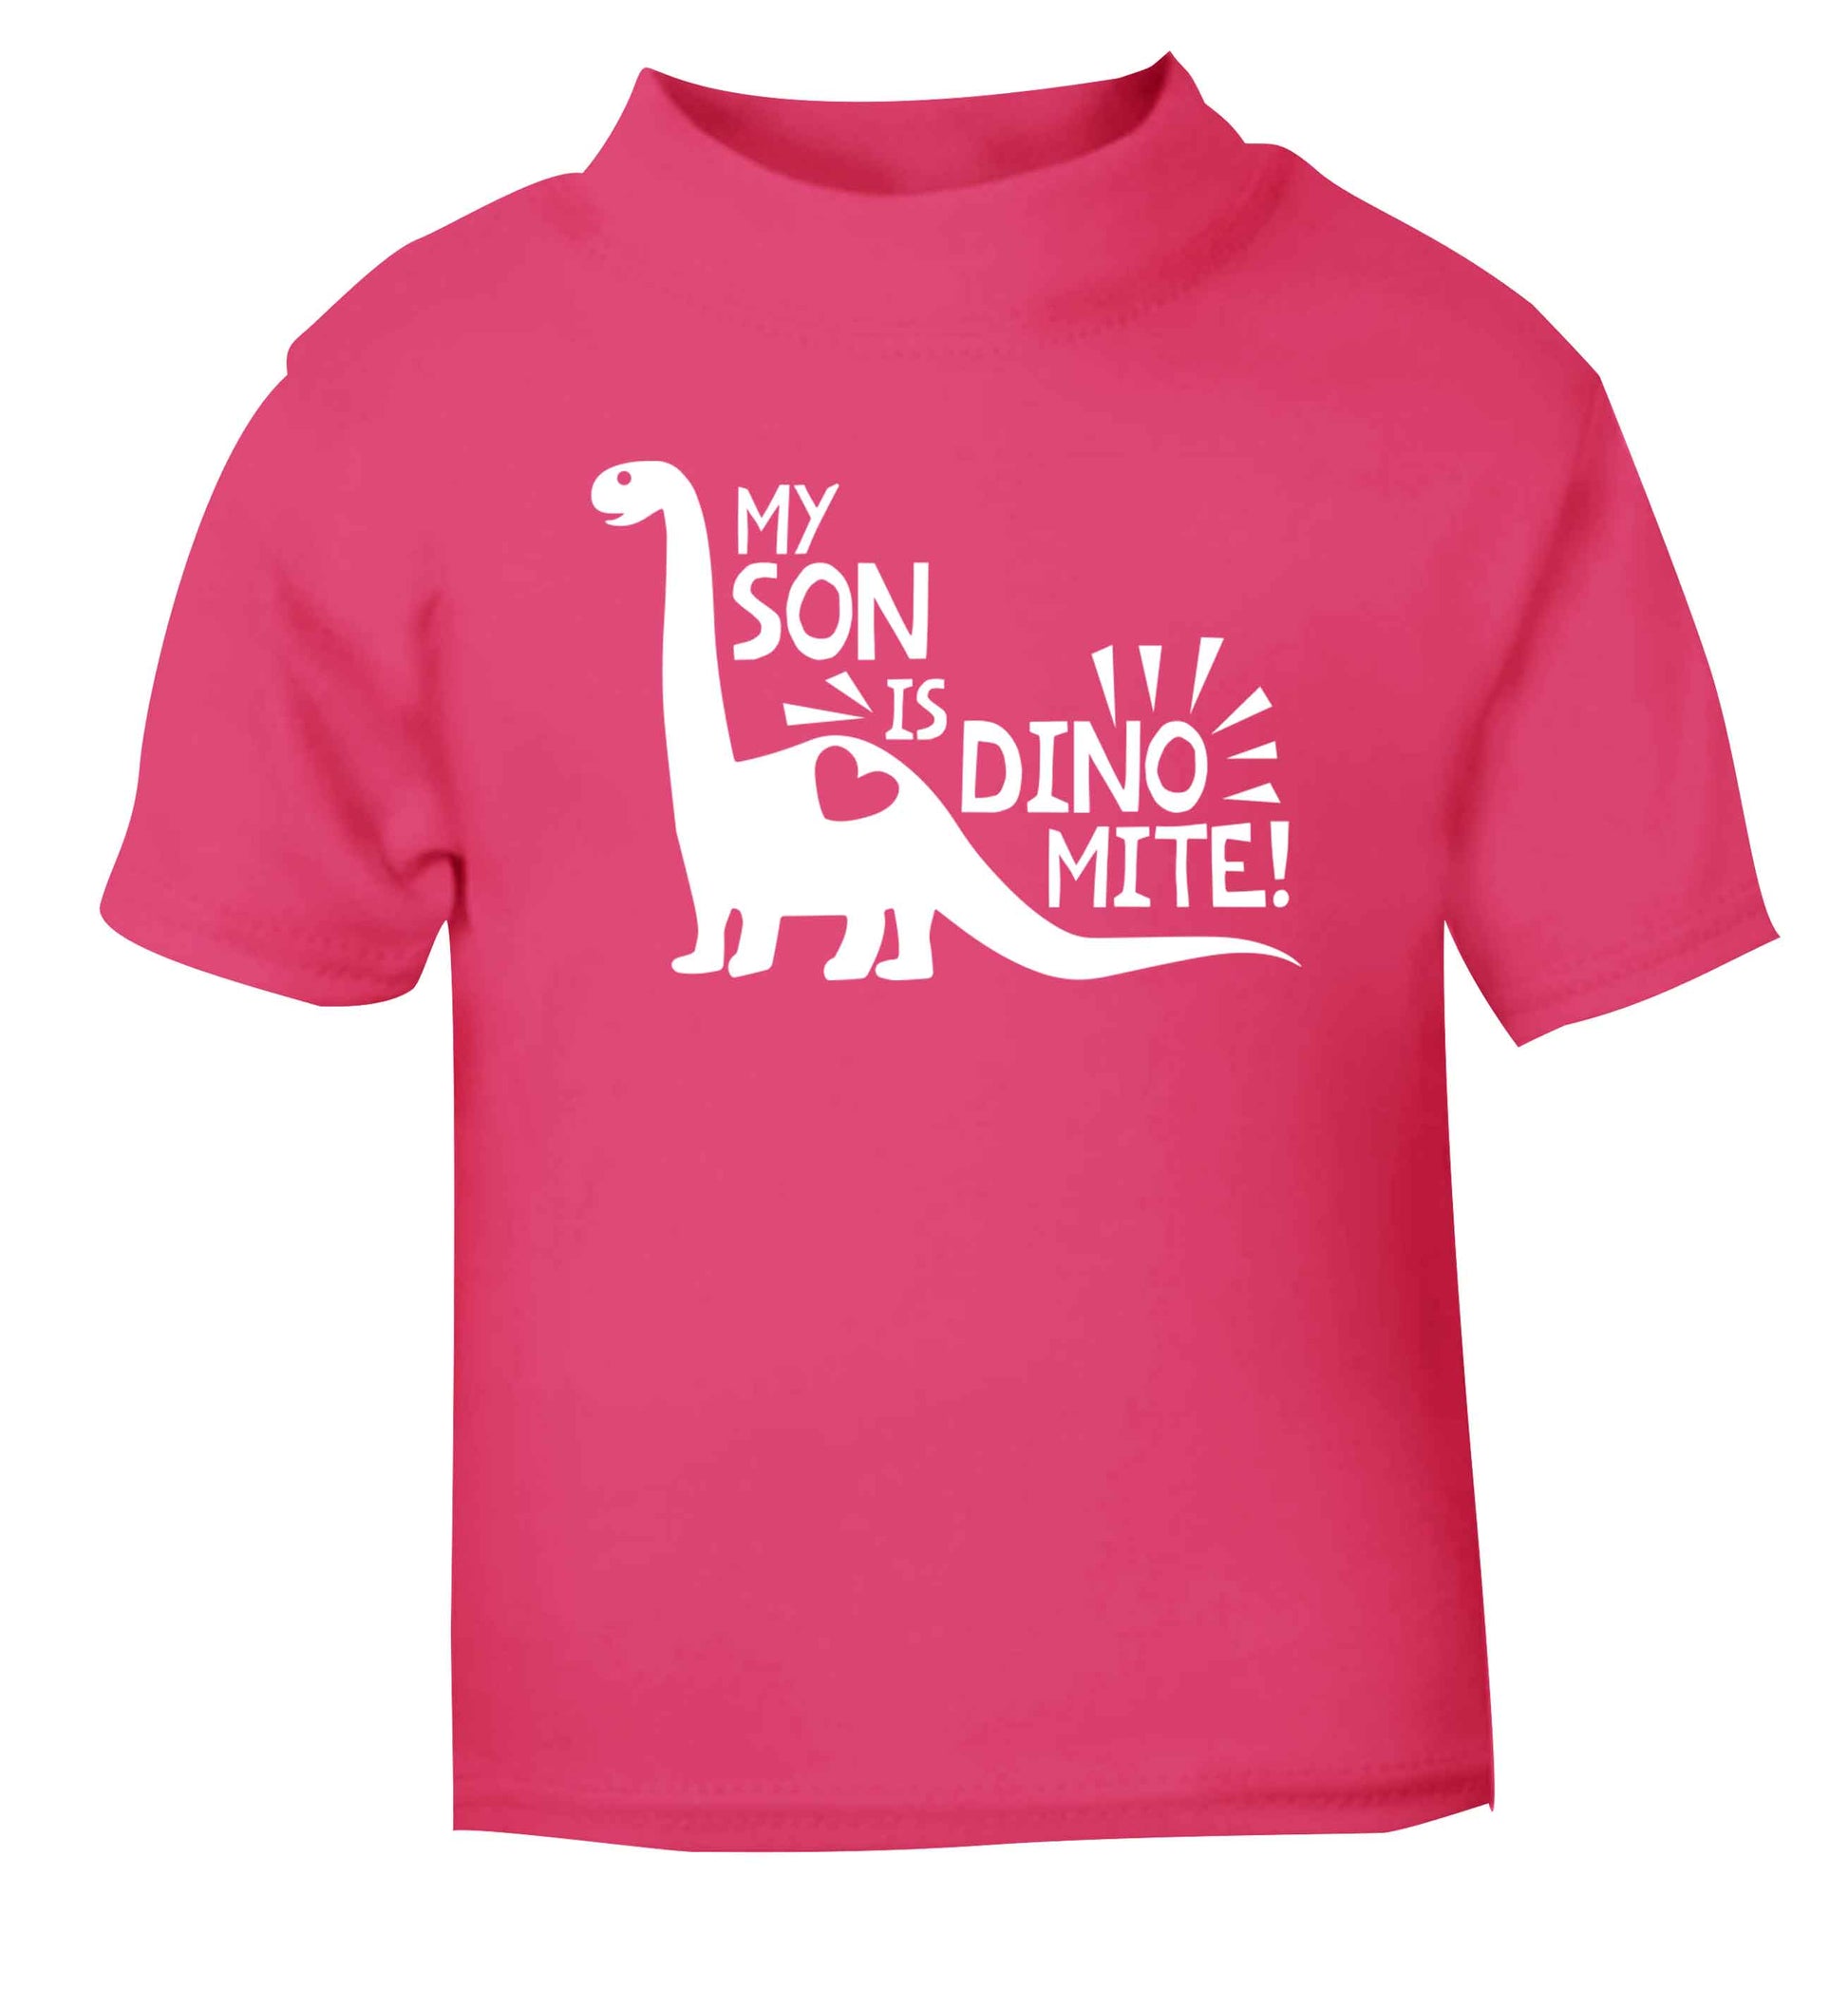 My son is dinomite! pink Baby Toddler Tshirt 2 Years